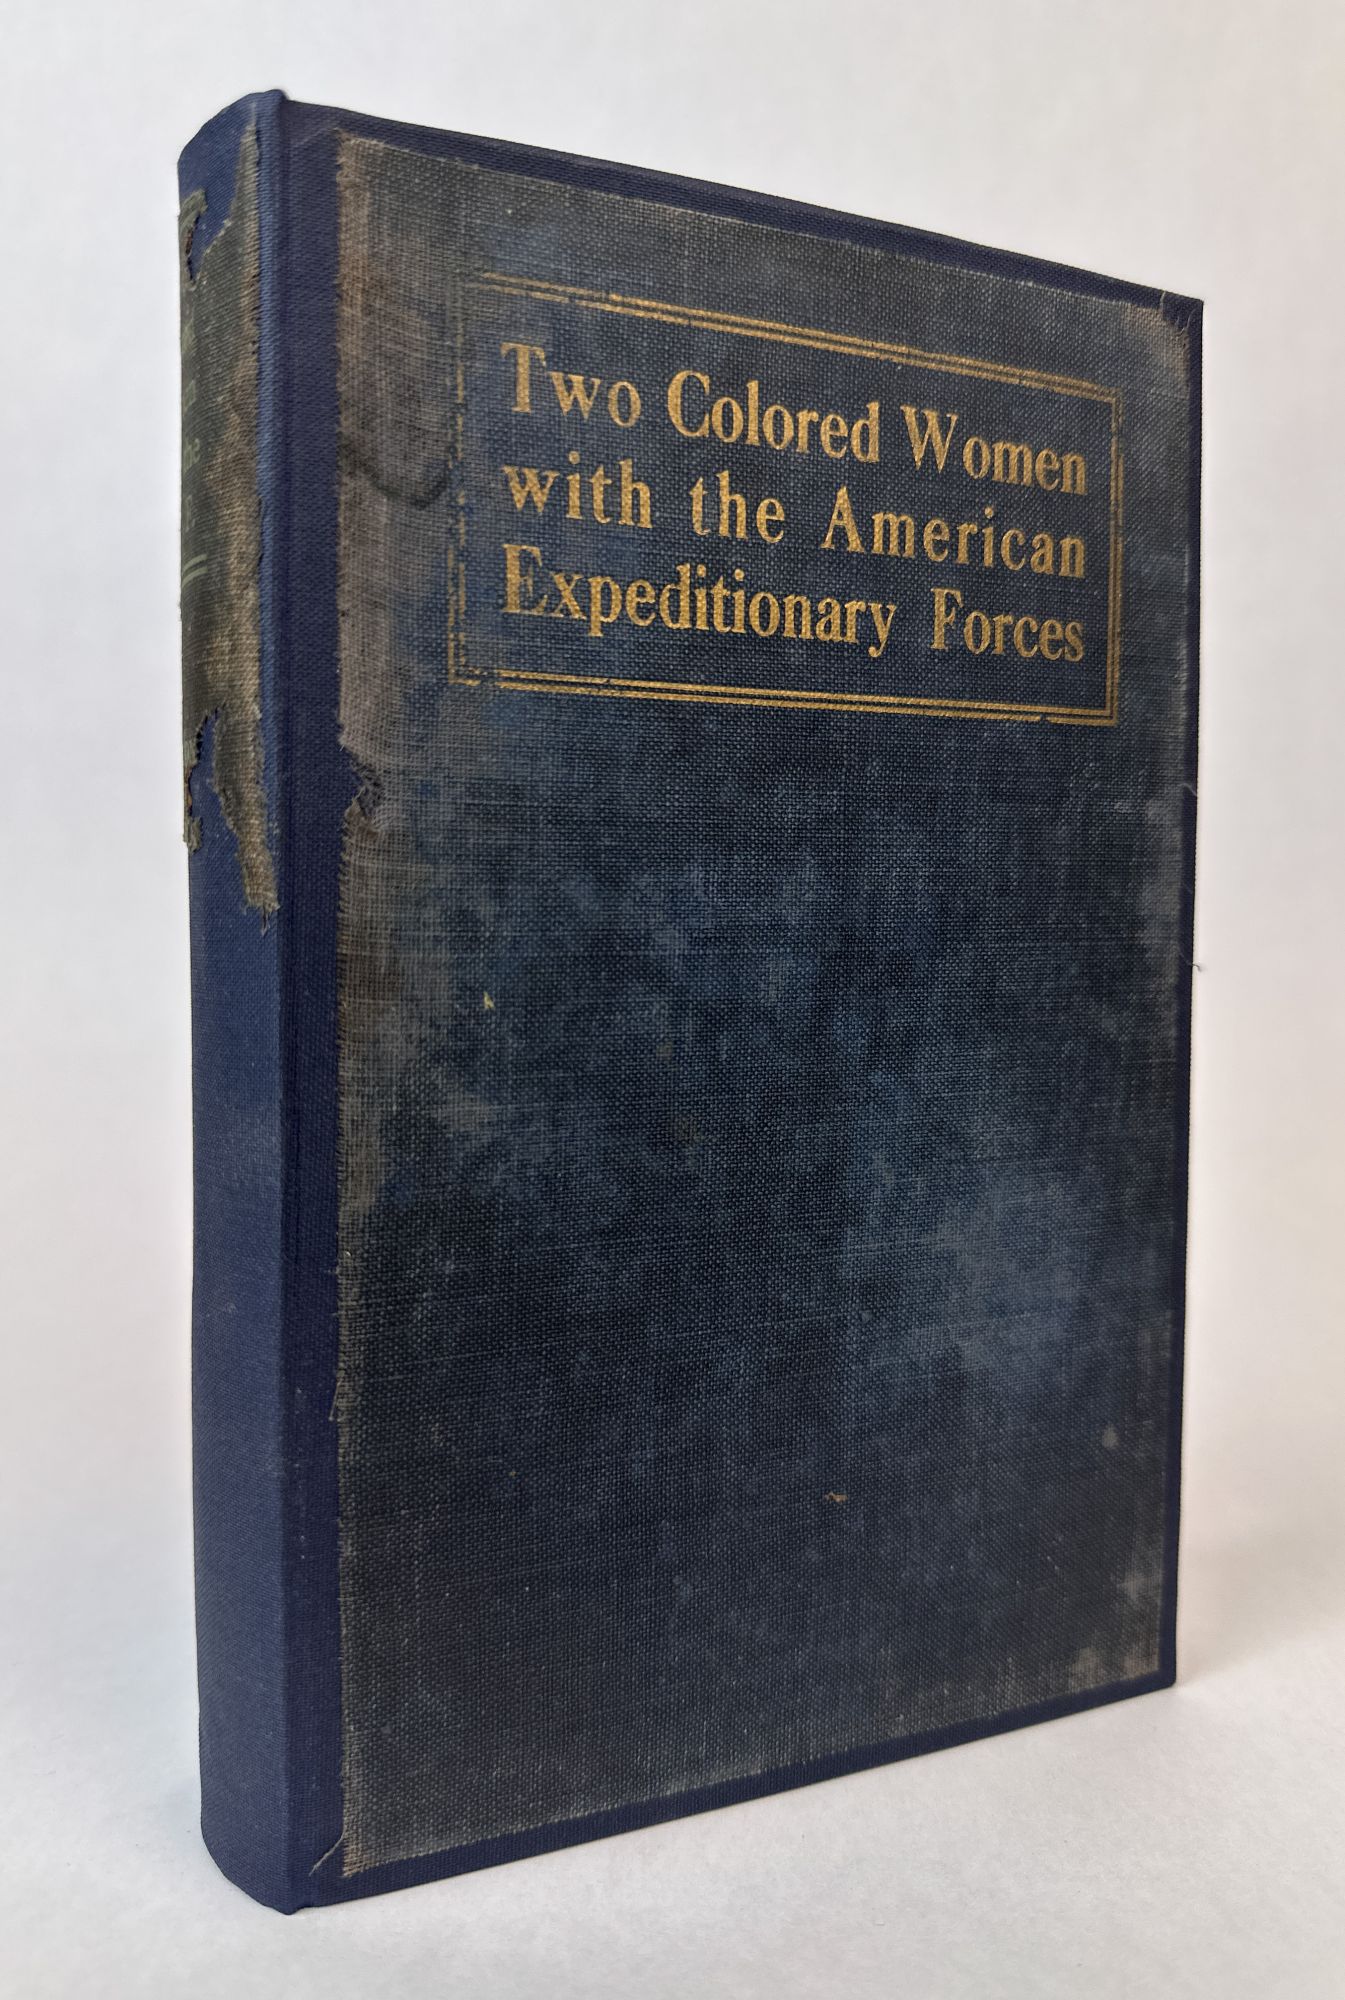 Product Image for TWO COLORED WOMEN WITH THE AMERICAN EXPEDITIONARY FORCES